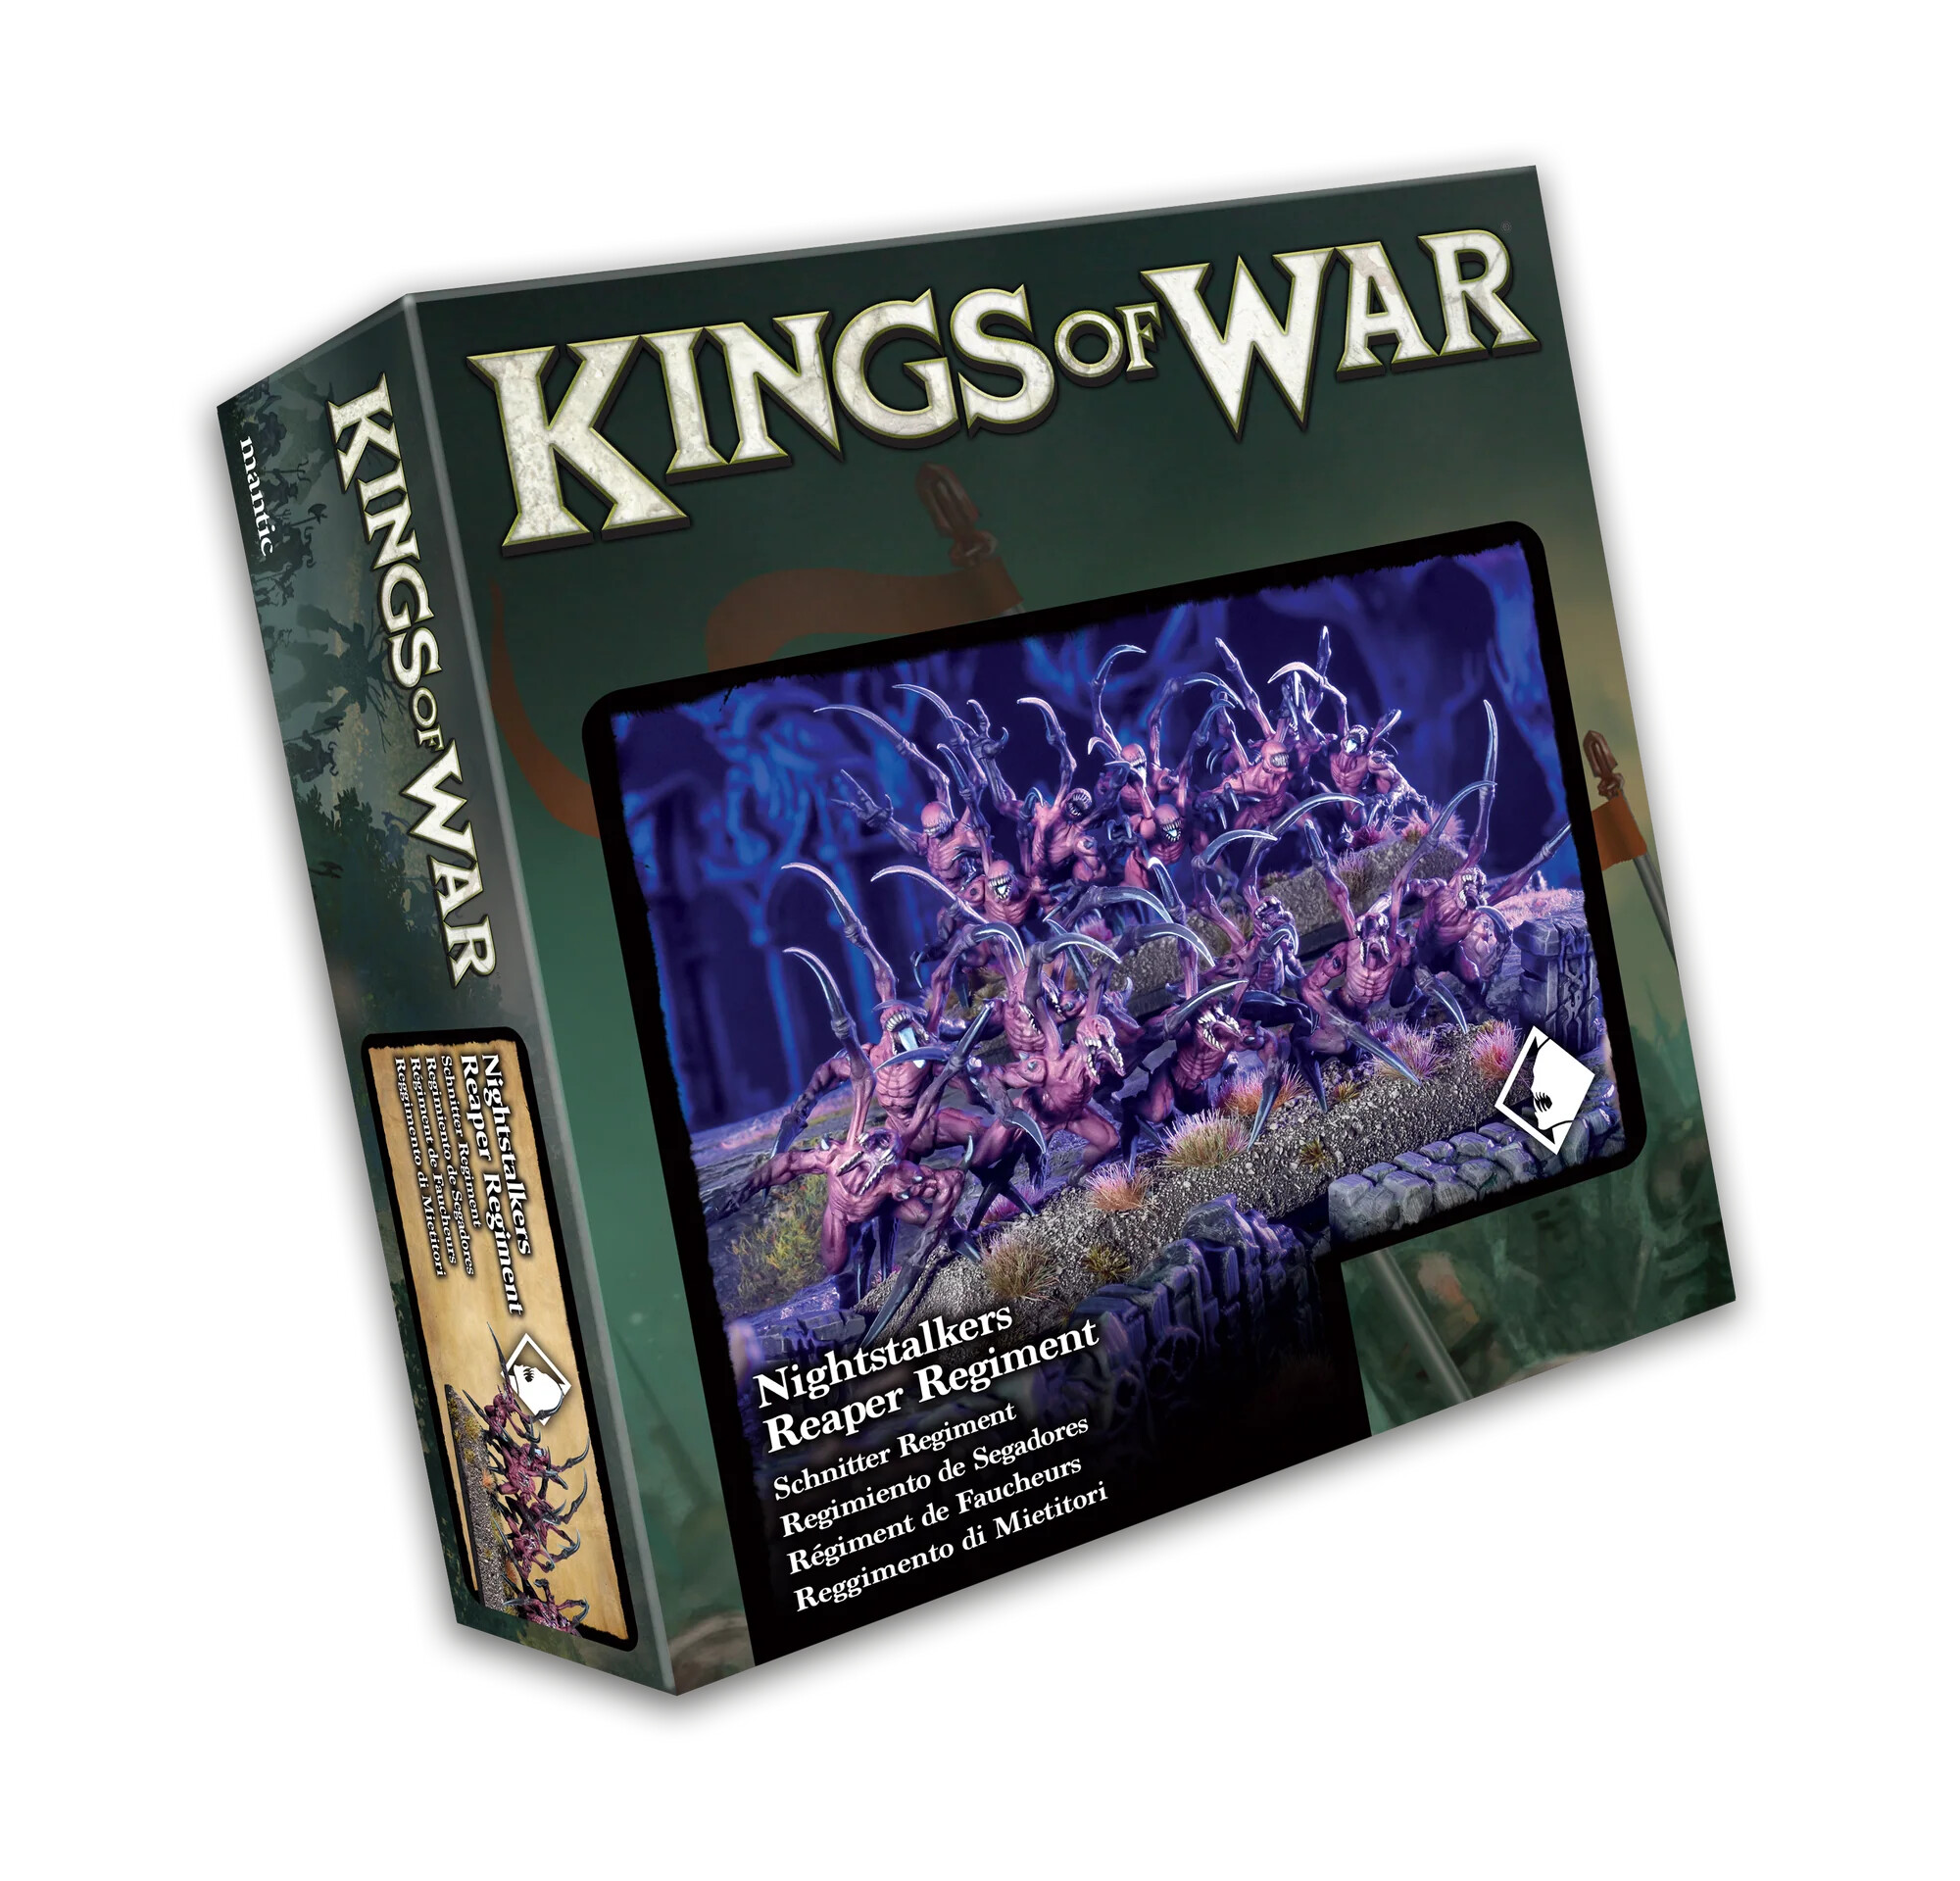 Clash of Kings 2024 - New Book Preview - Mantic Games